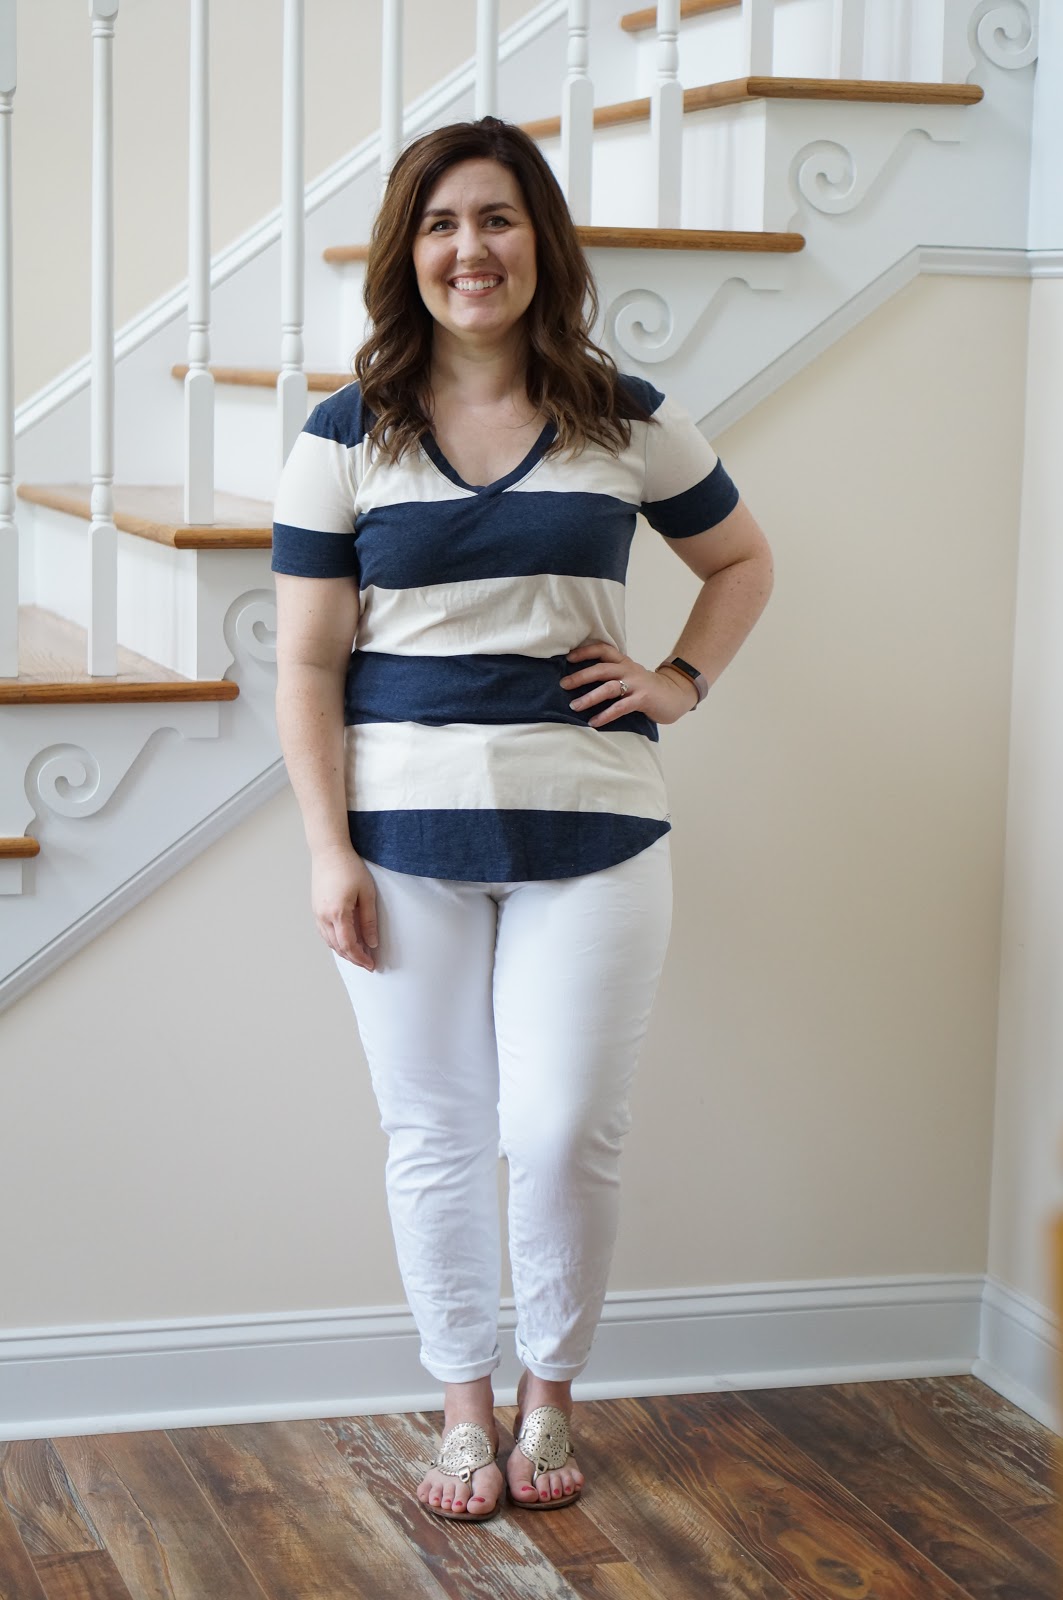 Popular North Carolina style blogger Rebecca Lately shares her July 2018 Stitch Fix outfits.  Click here to see what she kept and what sent back!